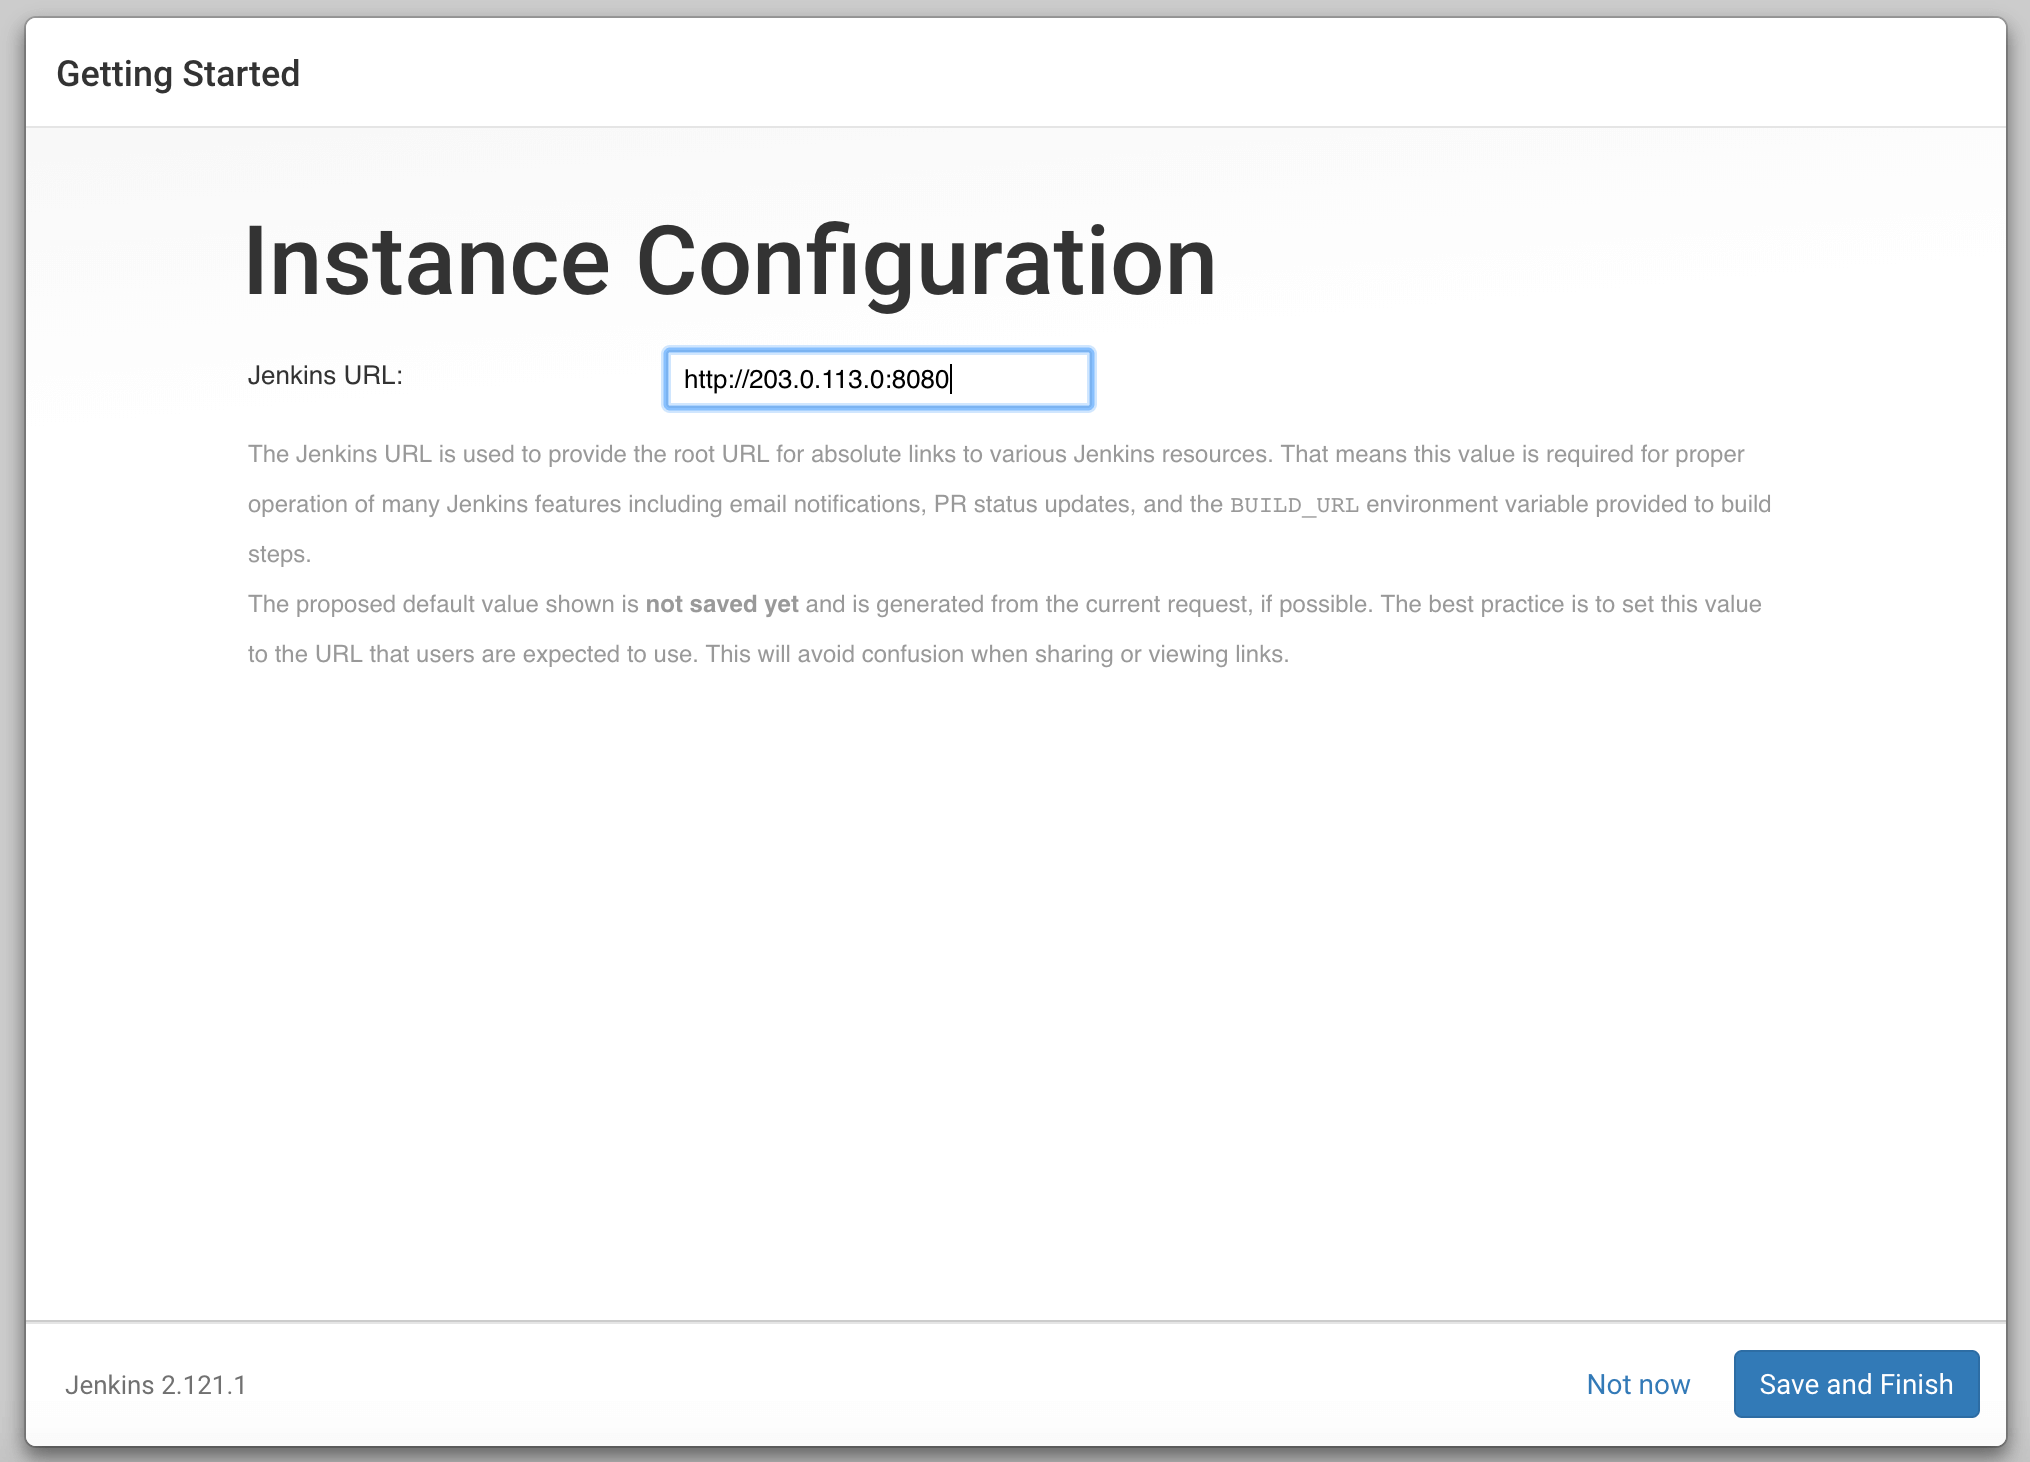 Instance confirmation page of Jenkins